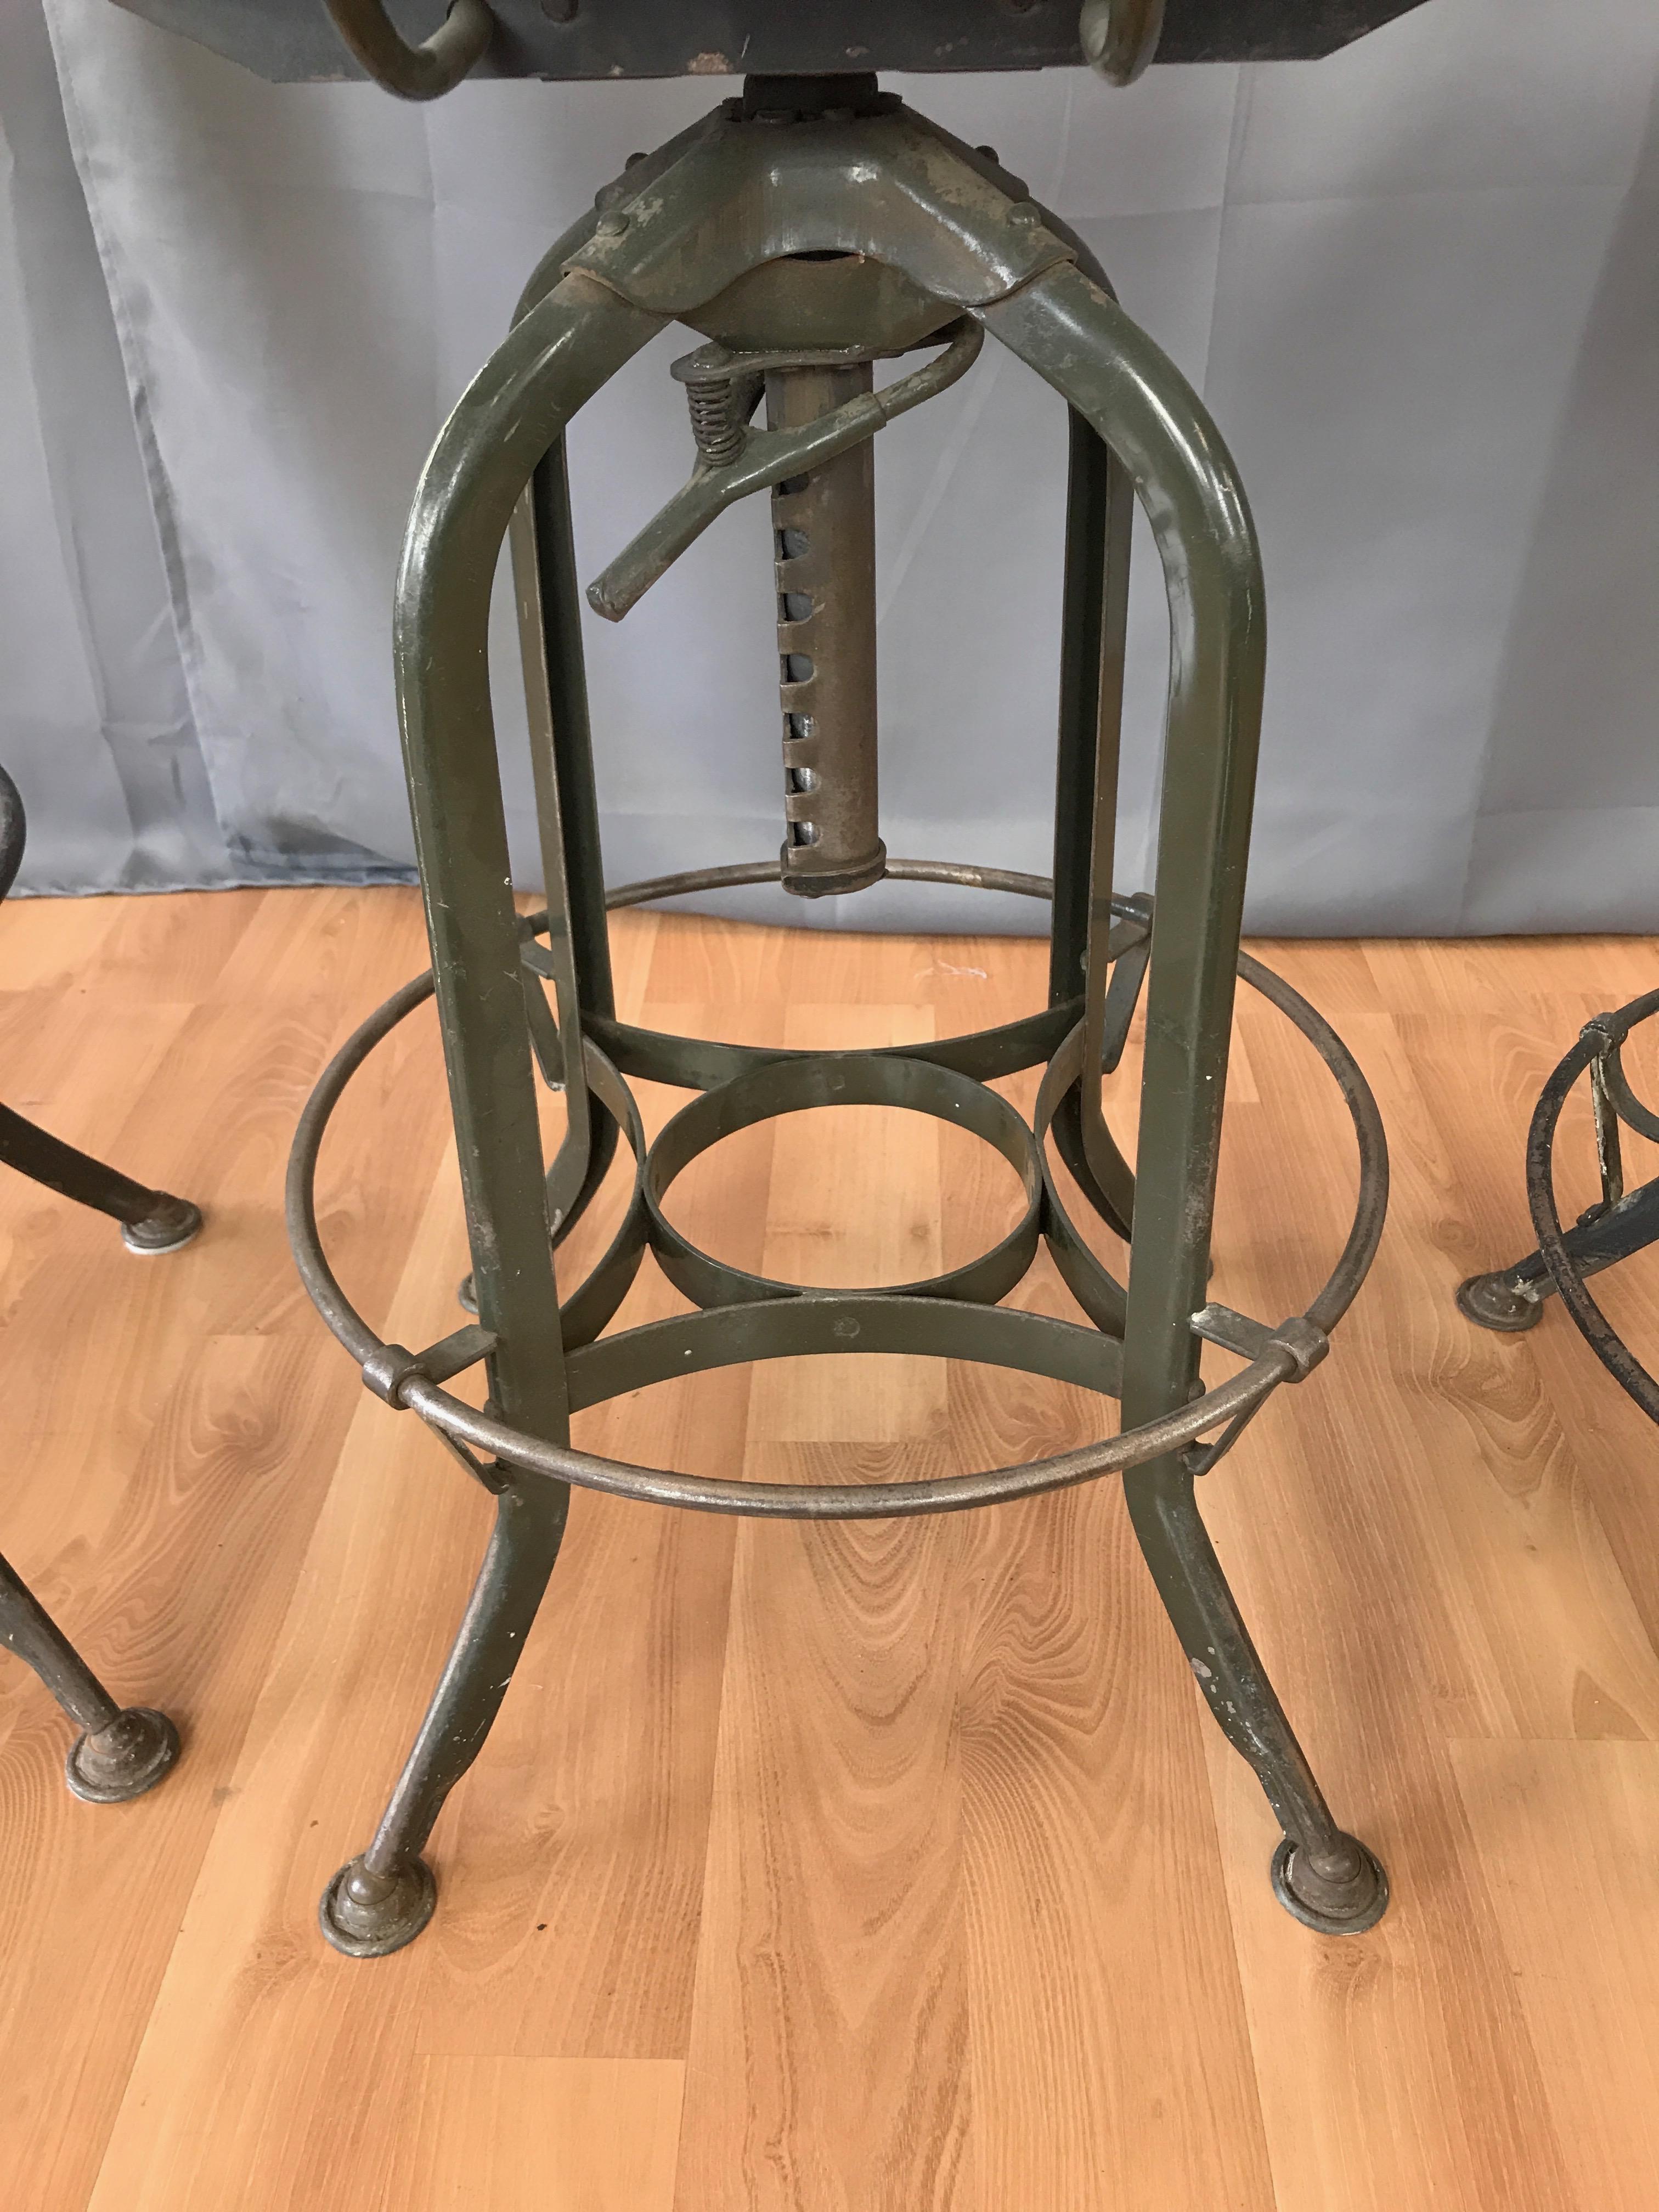 Toledo Industrial Adjustable Height Swivel Stools with Backs, Two Available 9